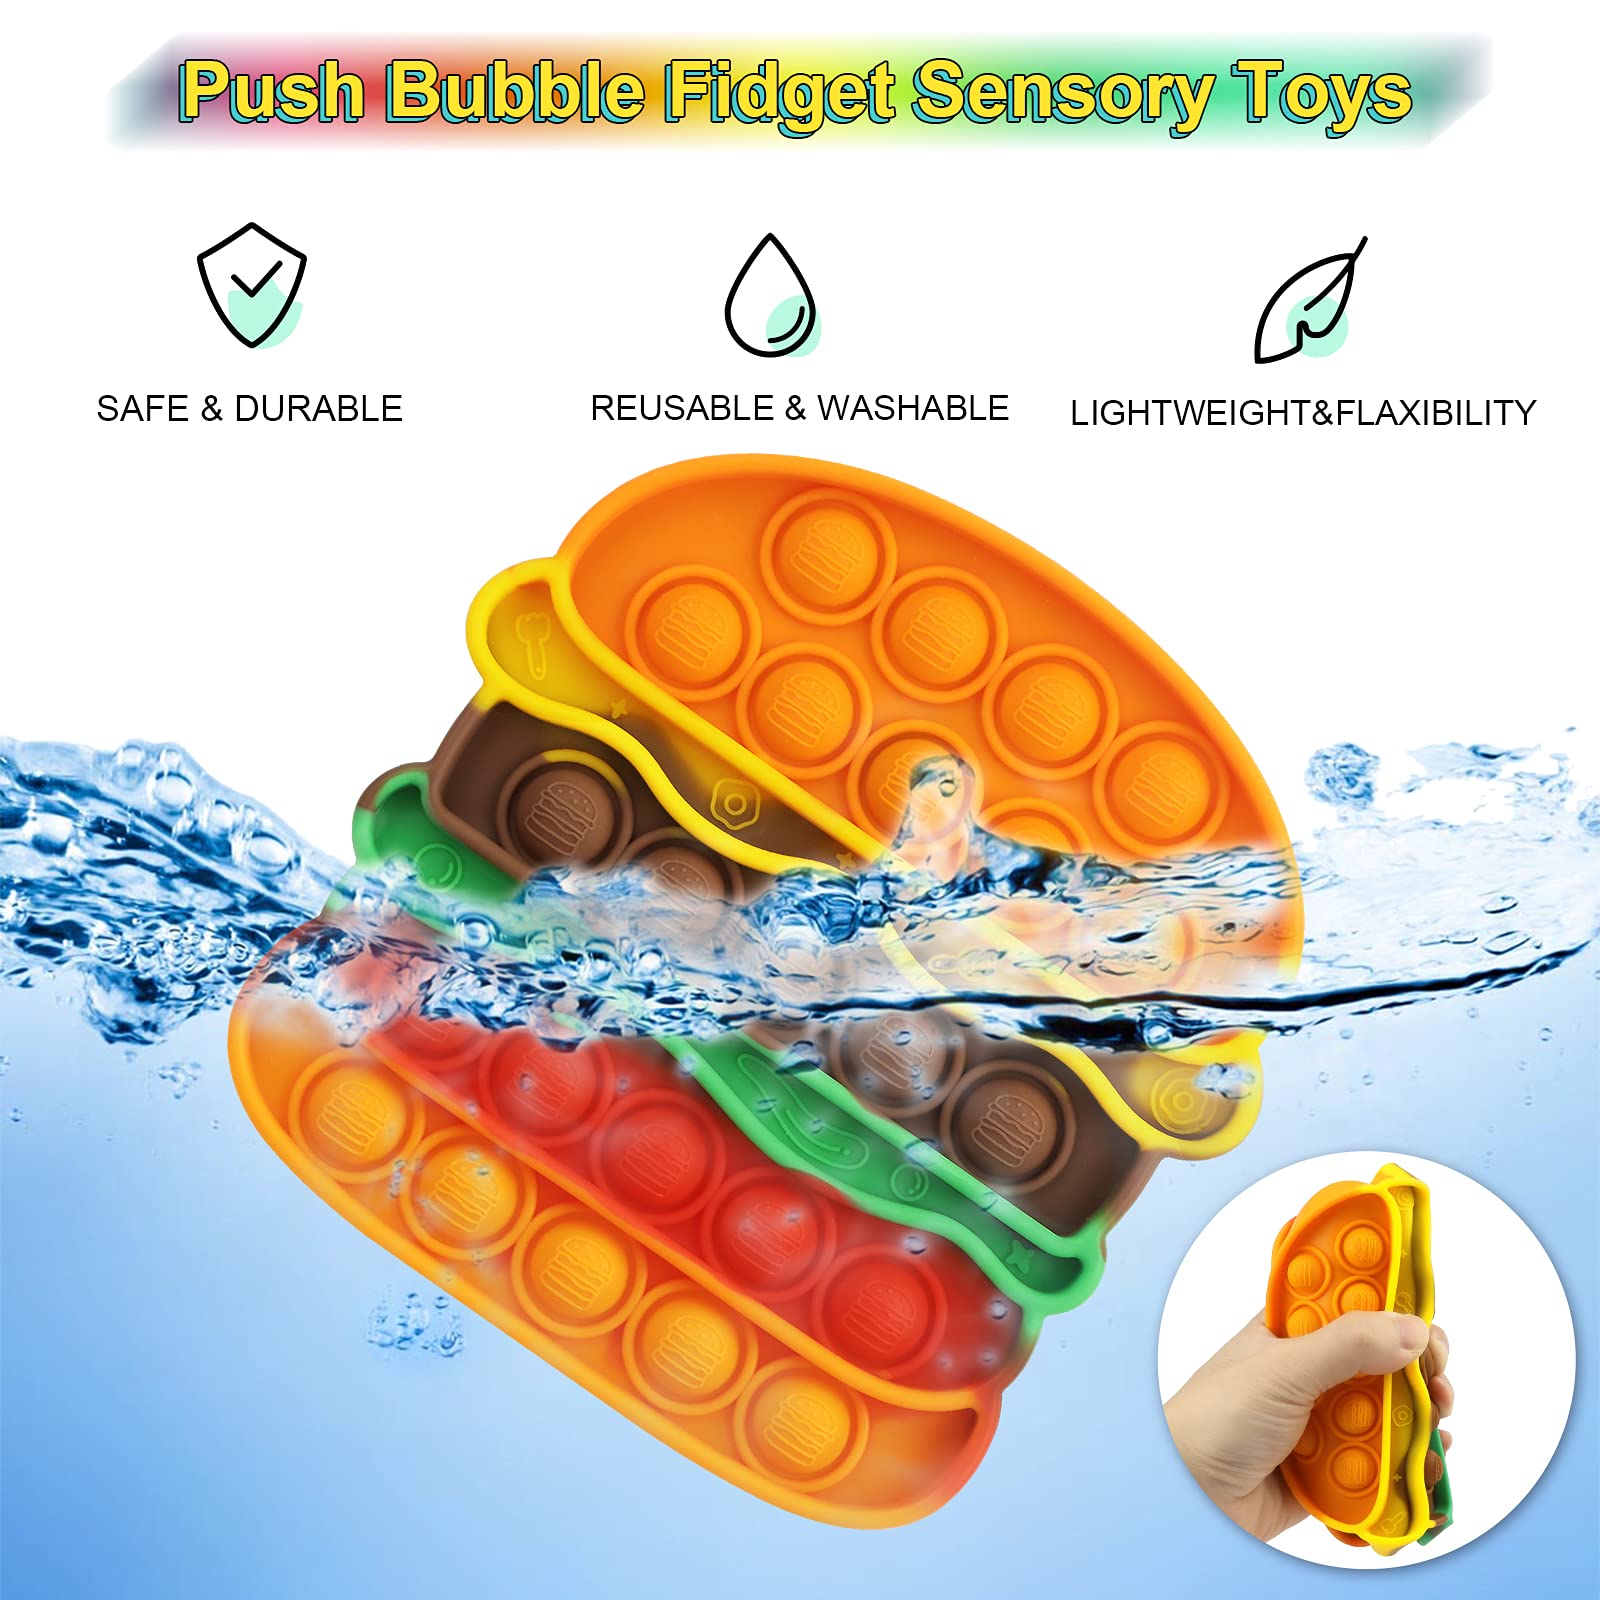 Aemotoy 3PCS Push Bubble Fidget Sensory Toys for Kids Adults Silicone Pop Rainbow Hamburger Squeeze Toy Stress Anxiety Relief Toys Novelty Gift for Autism ADD ADHD,Colorful Hamburger+Fries+Cup